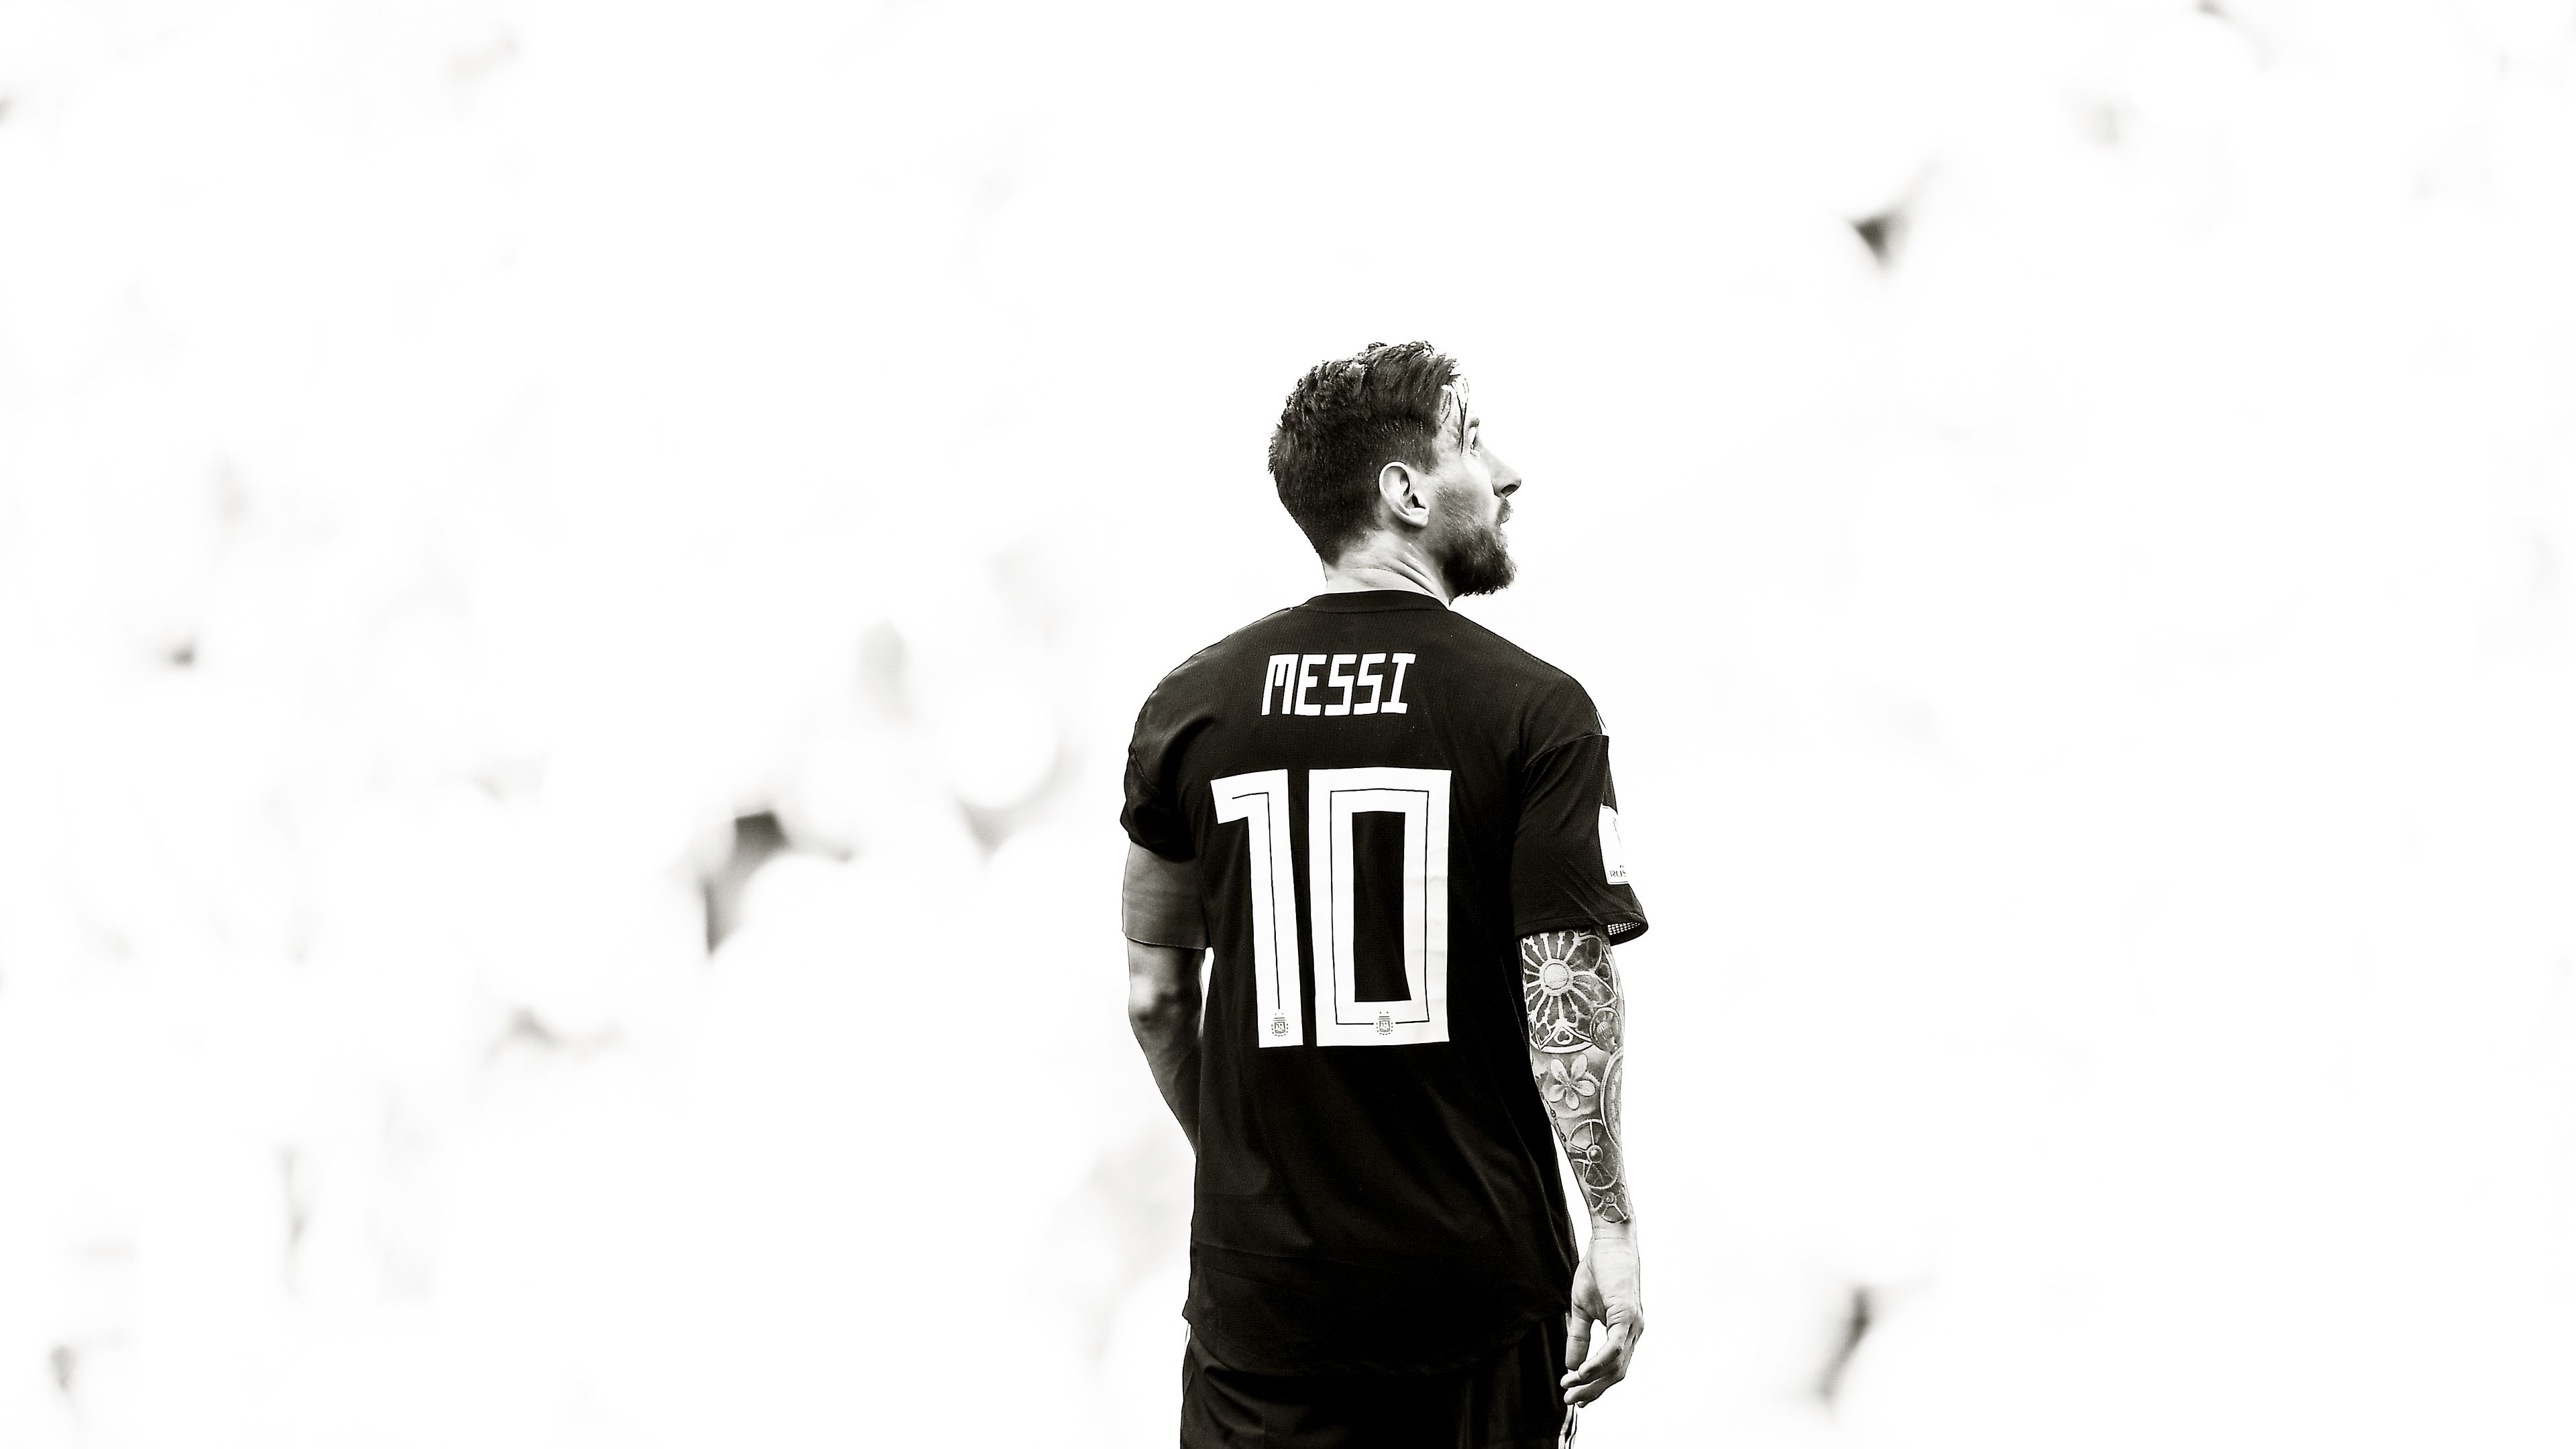 Wallpapers 4k Lionel Messi Monochrome Wallpapers